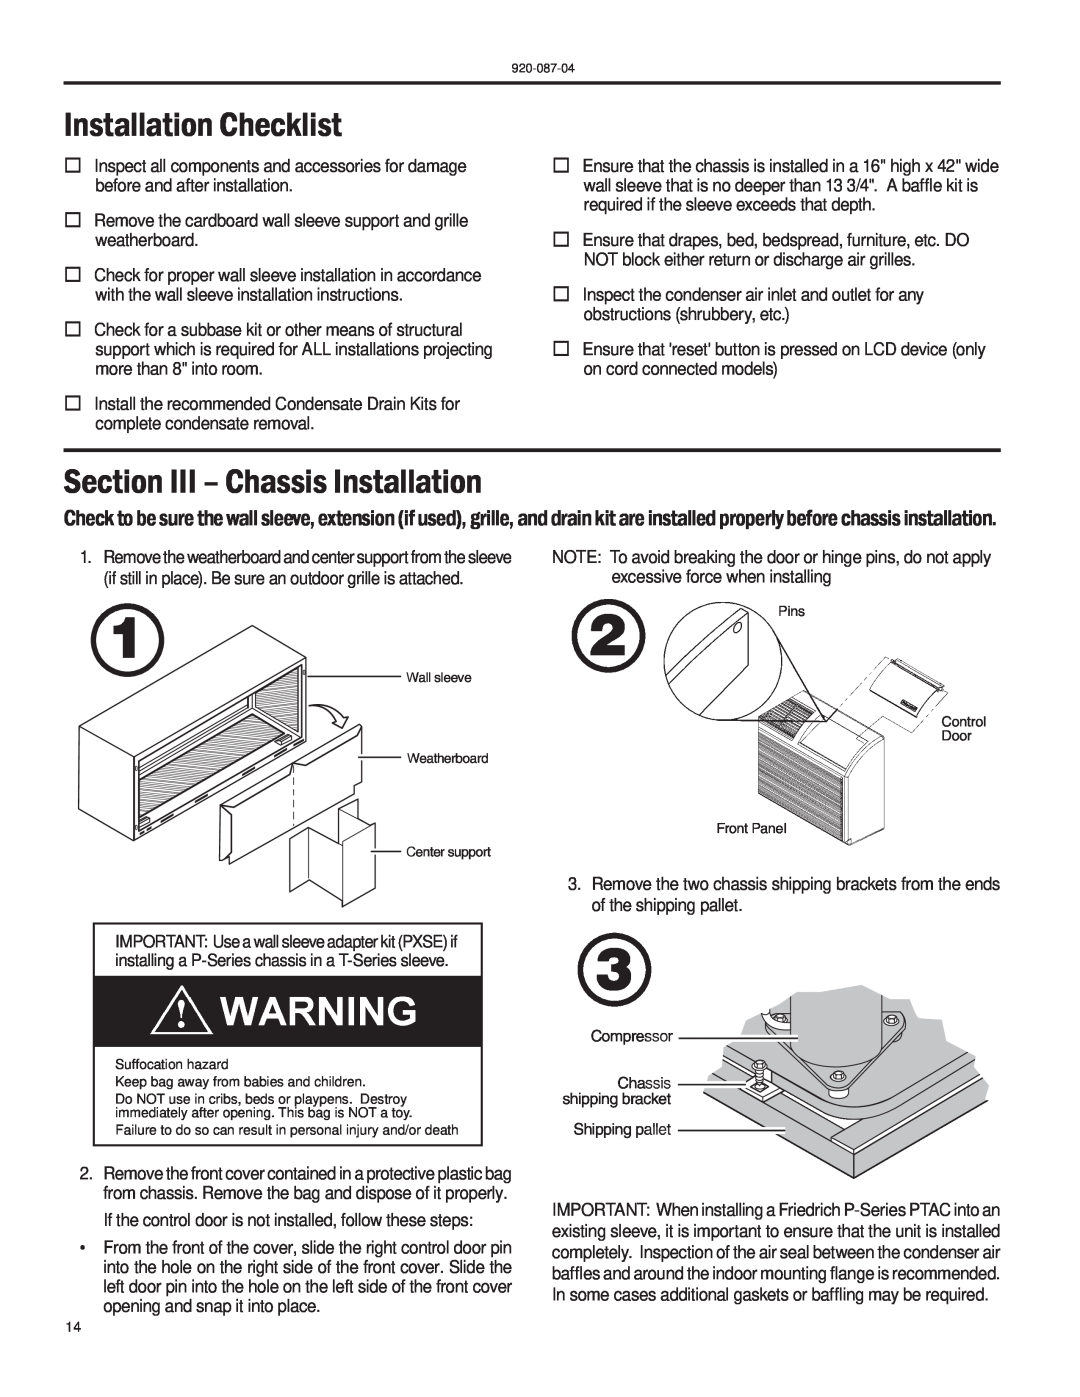 Friedrich HEAT PUMPS manual Installation Checklist, Section III - Chassis Installation, Compressor Chassis shipping bracket 